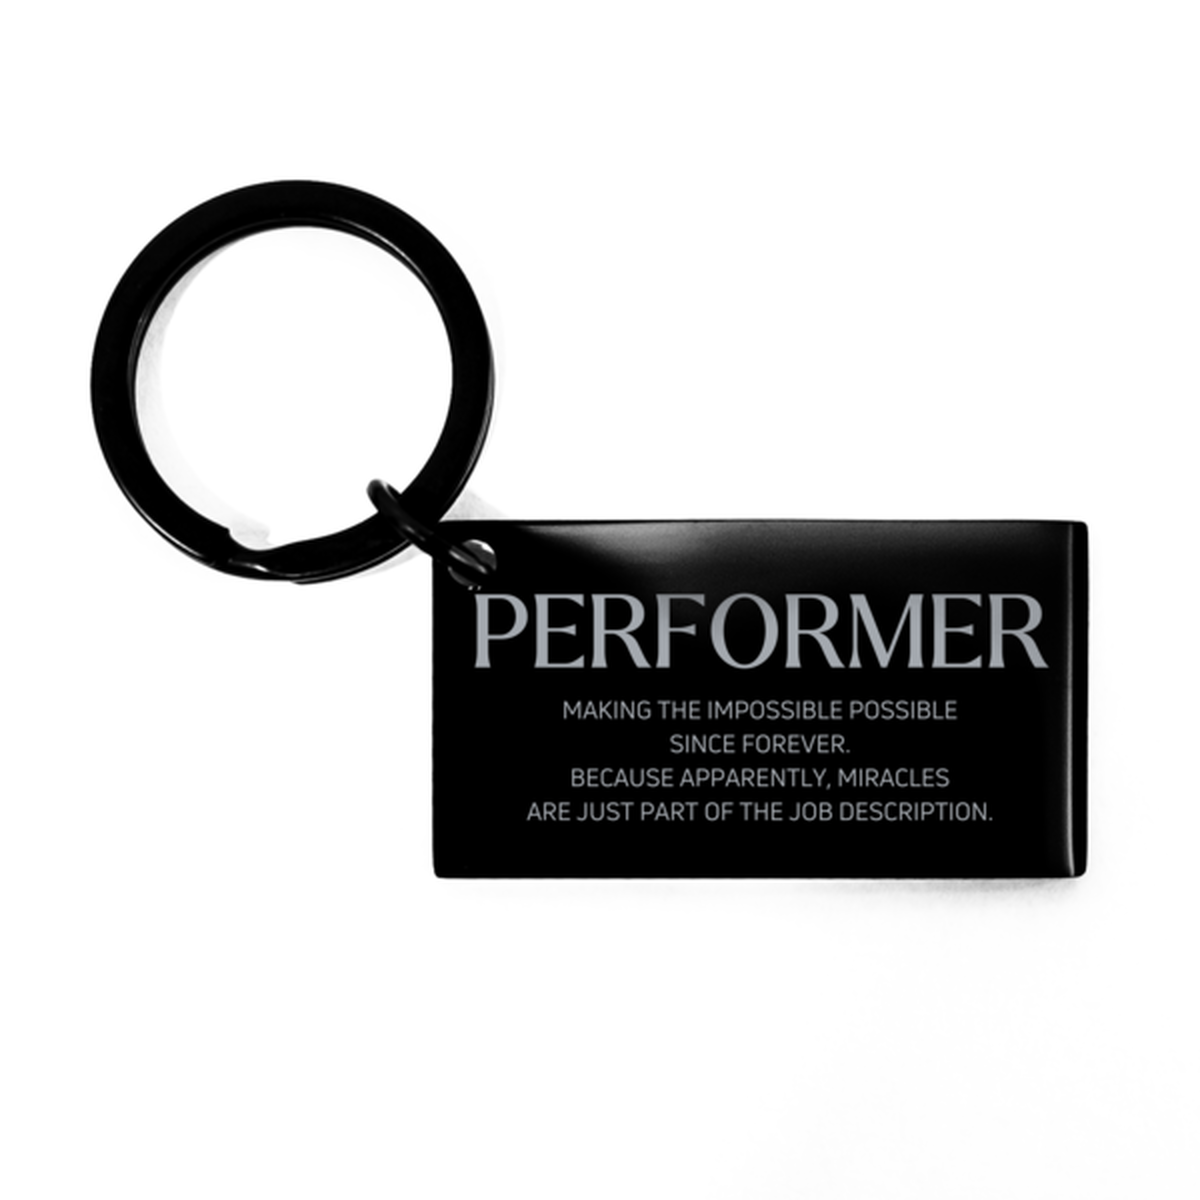 Funny Performer Gifts, Miracles are just part of the job description, Inspirational Birthday Keychain For Performer, Men, Women, Coworkers, Friends, Boss